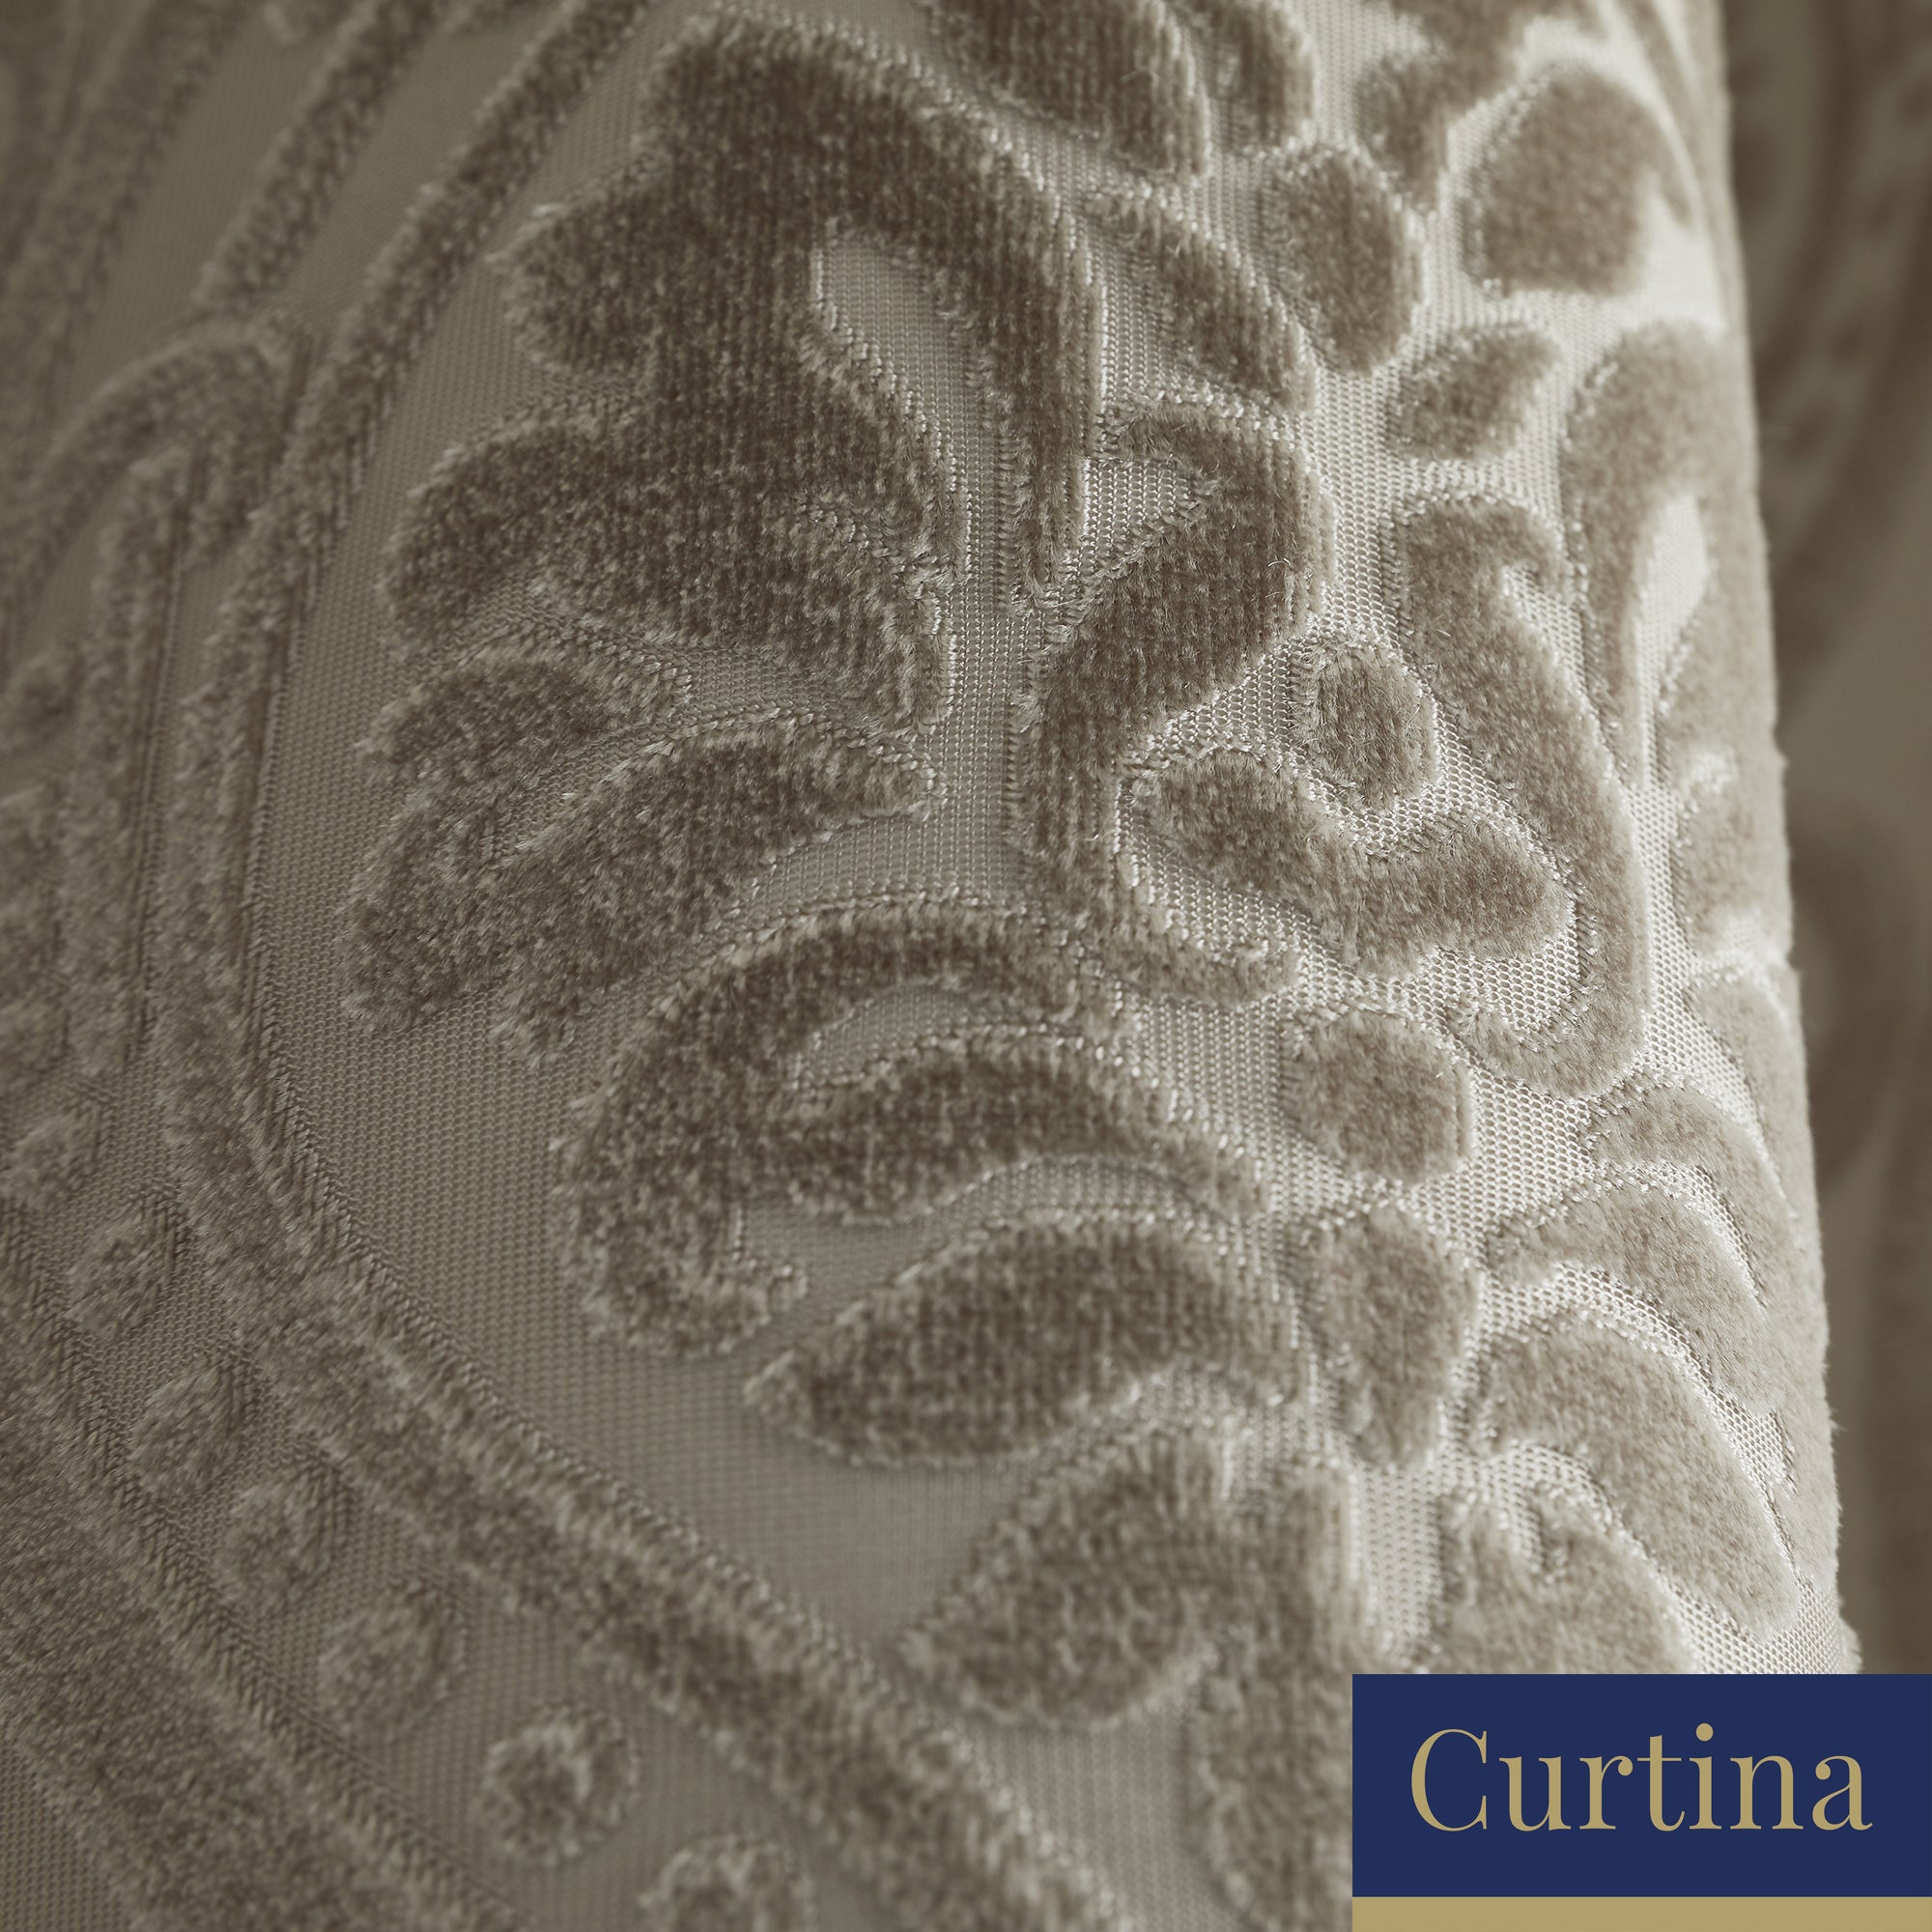 Chateau - Damask Jacquard Eyelet Curtains in Natural - By Curtina